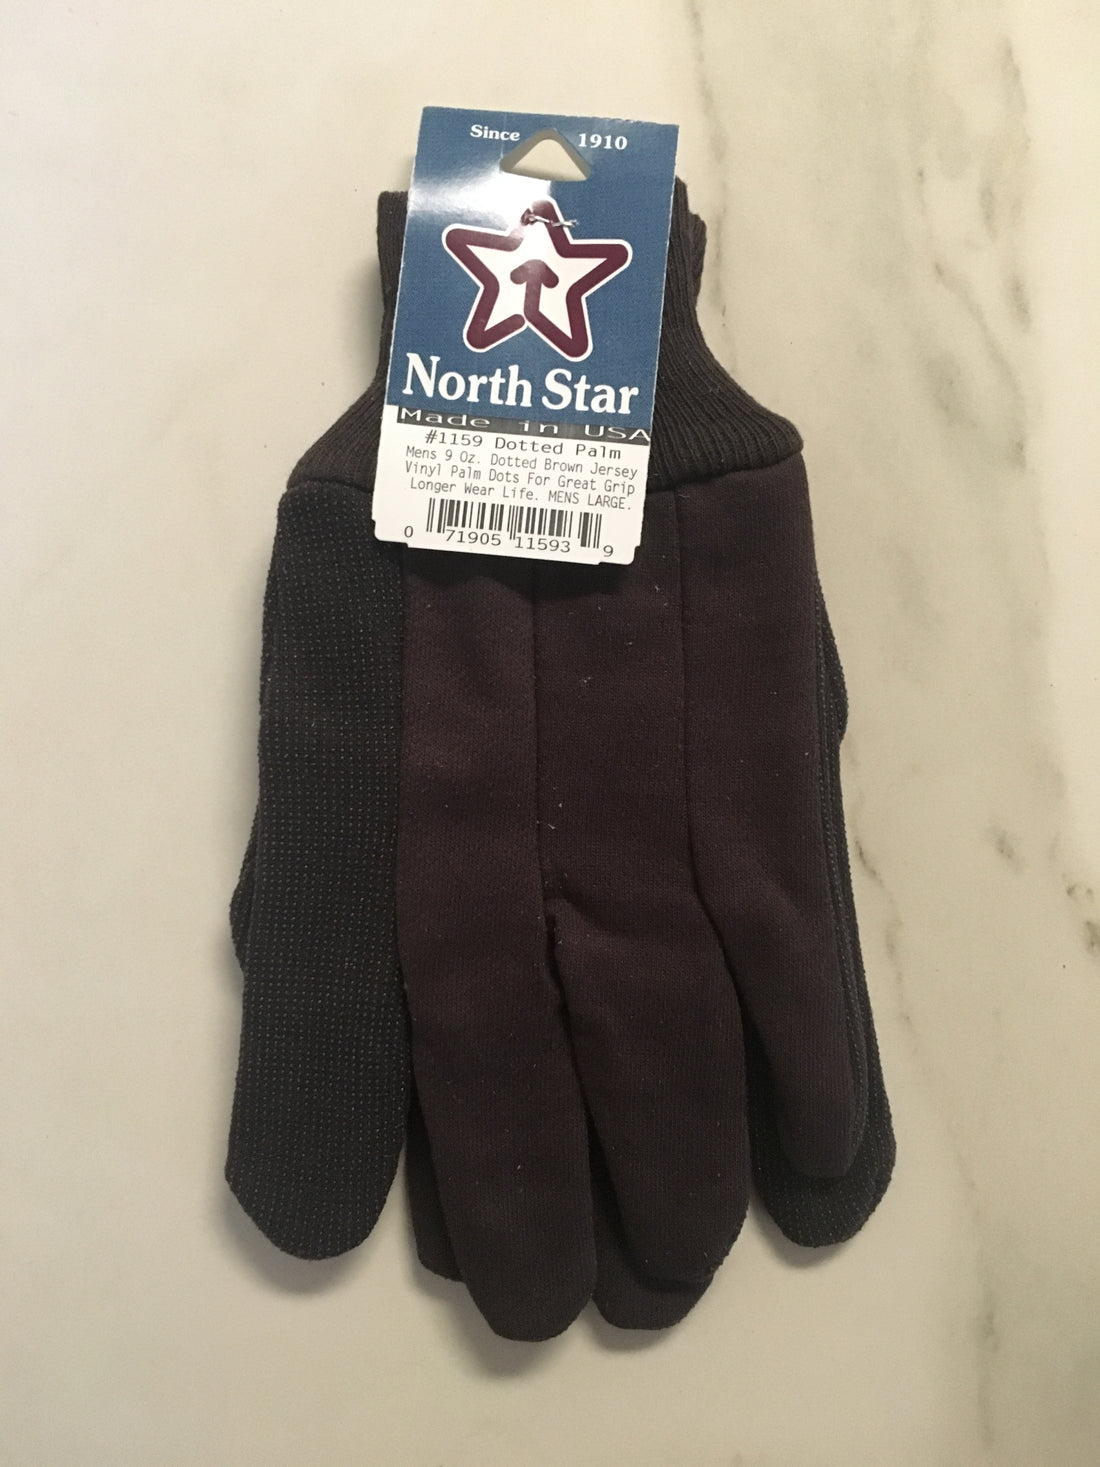 North Star- Dotted Palm Gloves